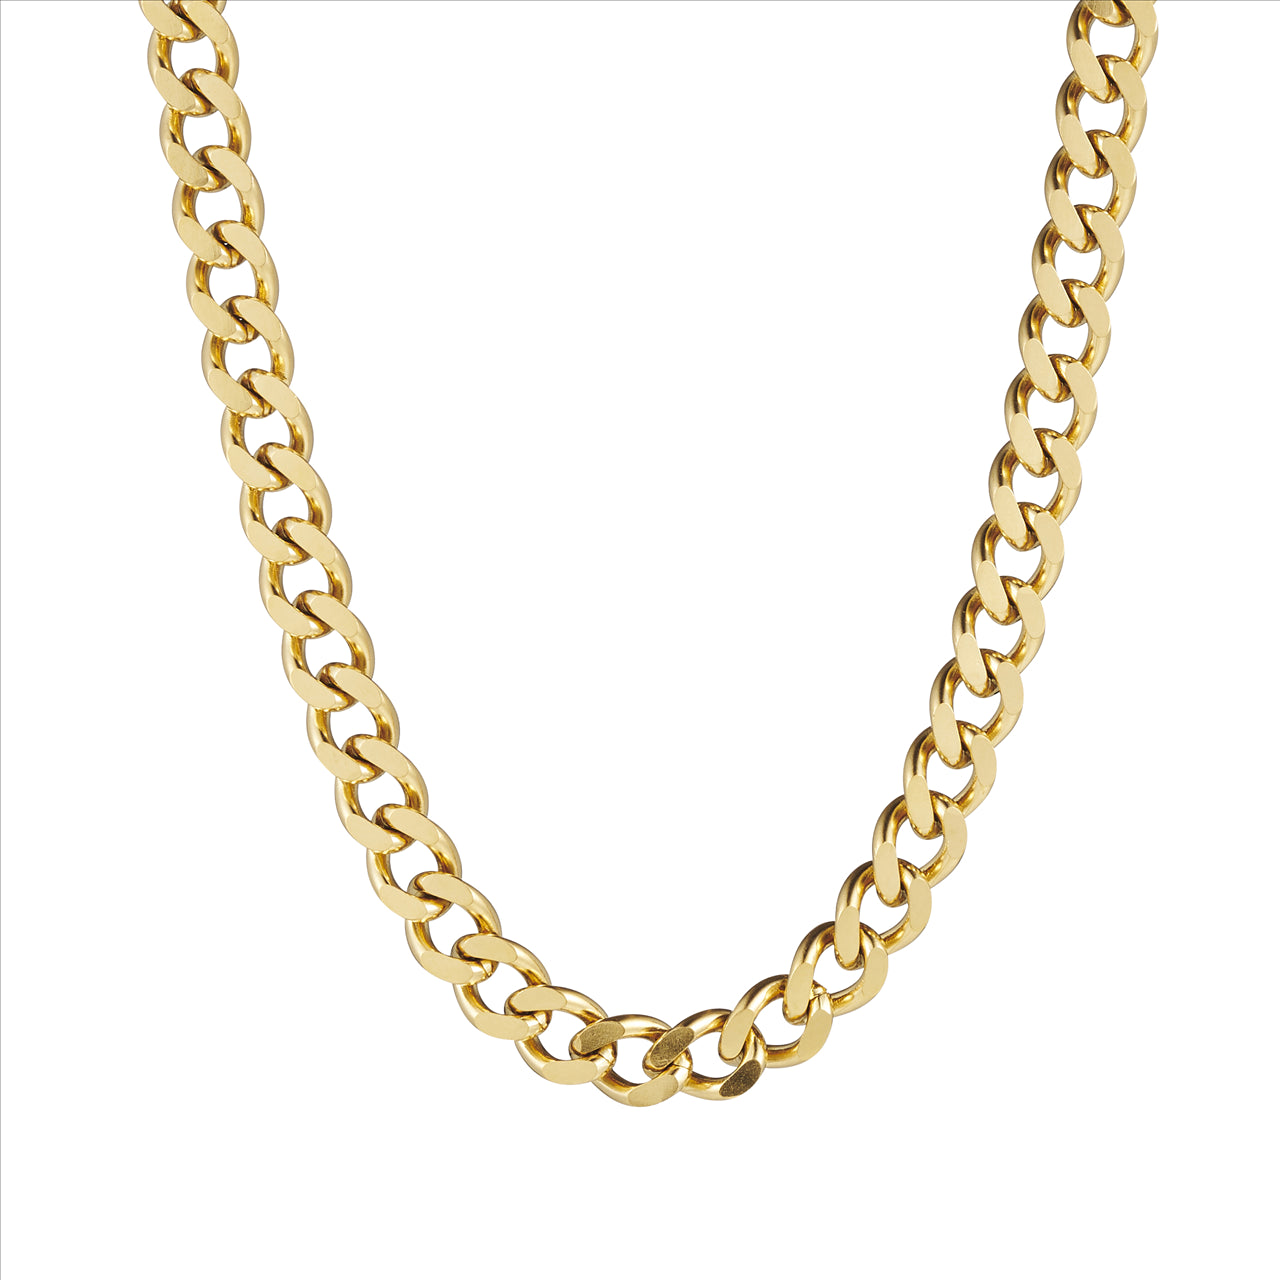 Ion plated 14k Gold Stainless Steel Neck Chain